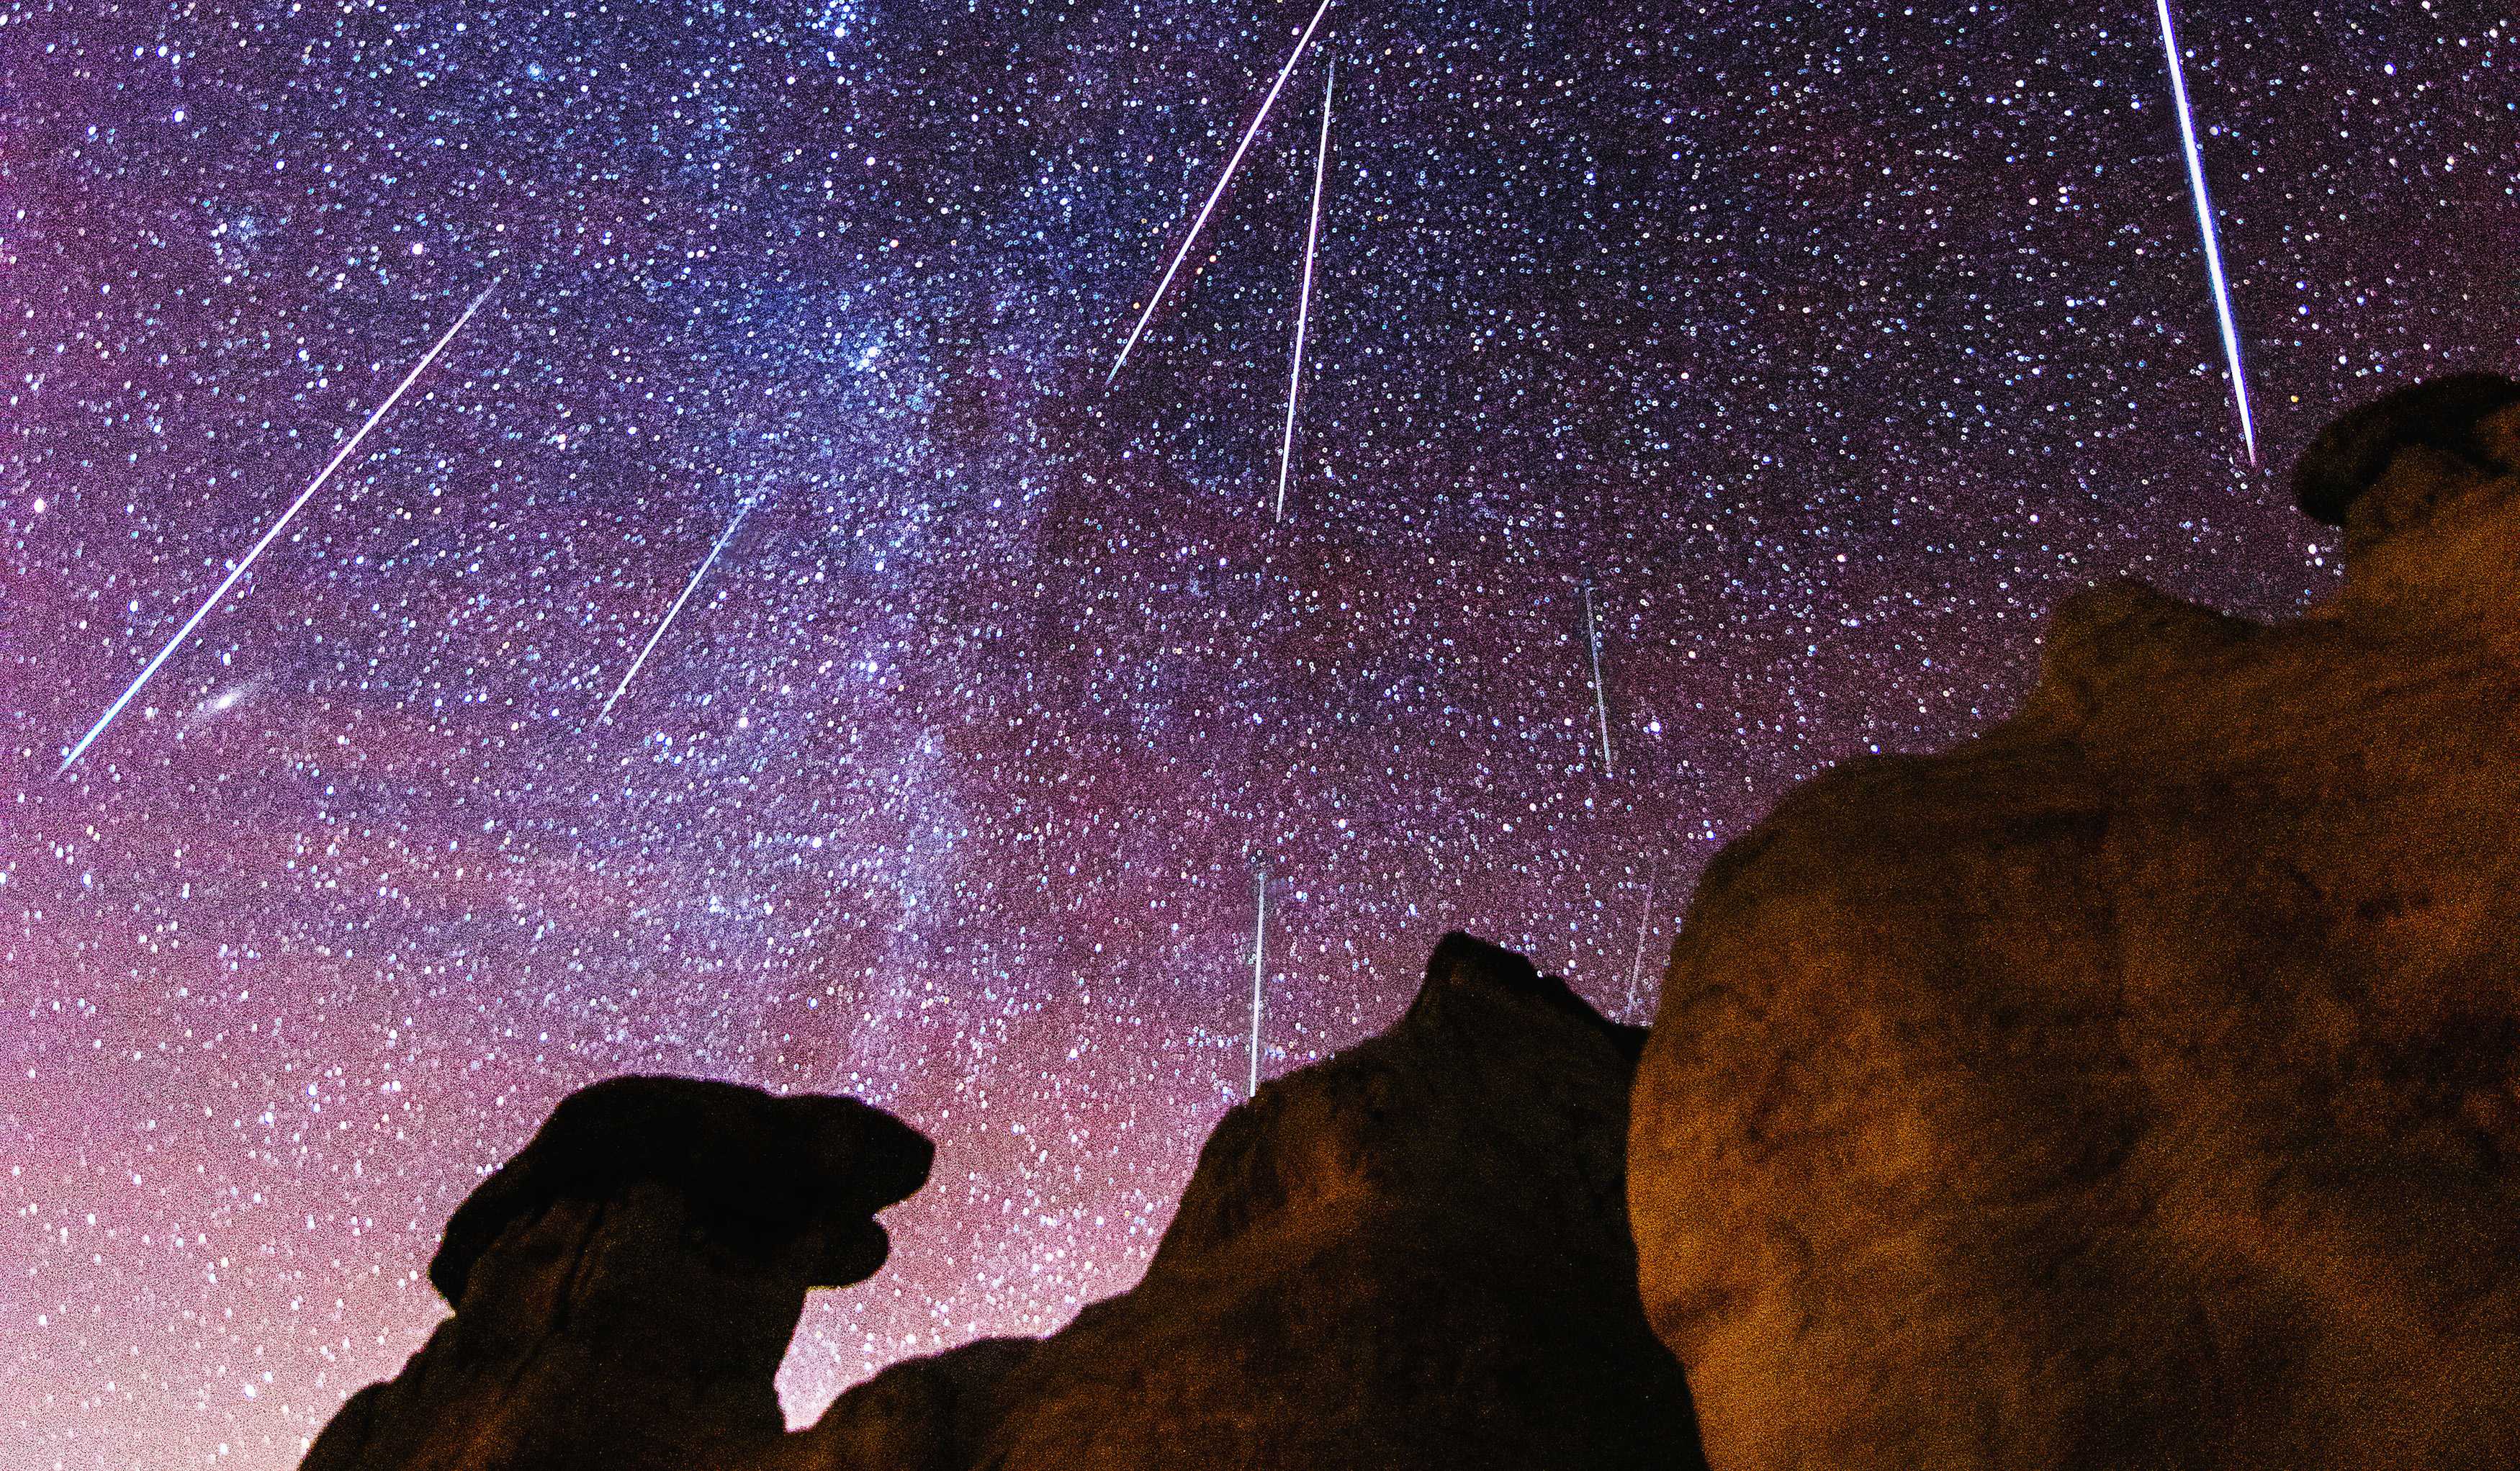 The Orionid meteor shower will peak this weekend